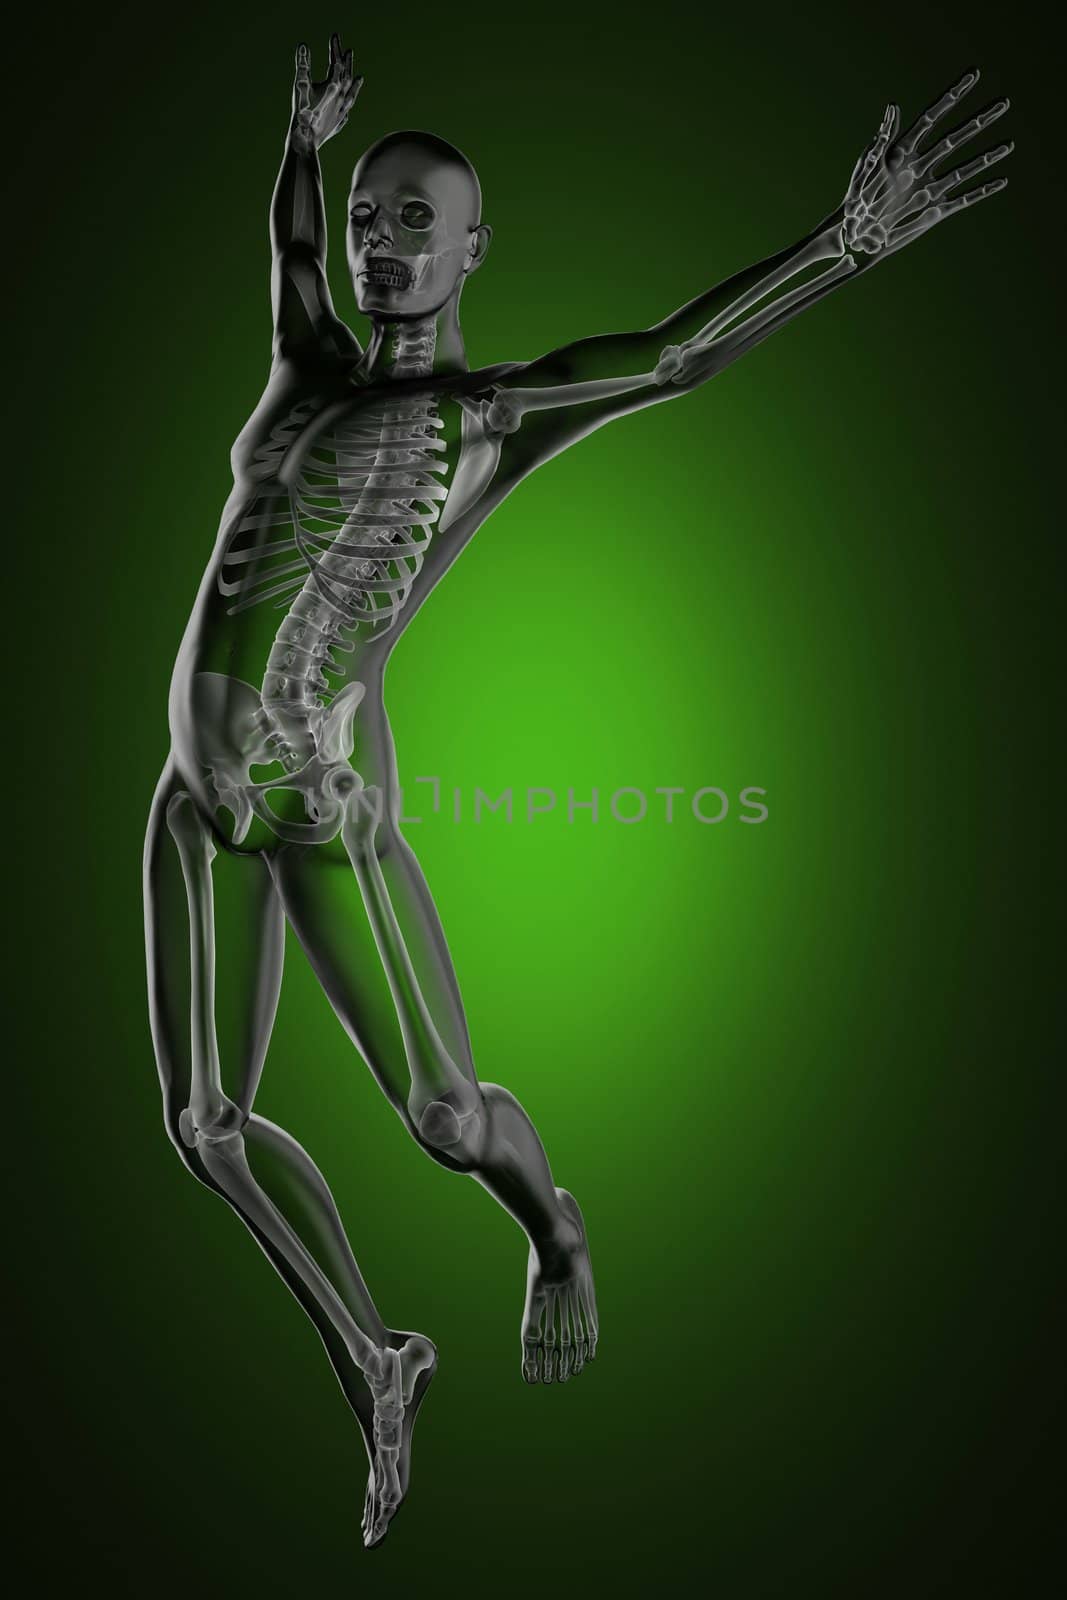 jump man radiography by videodoctor